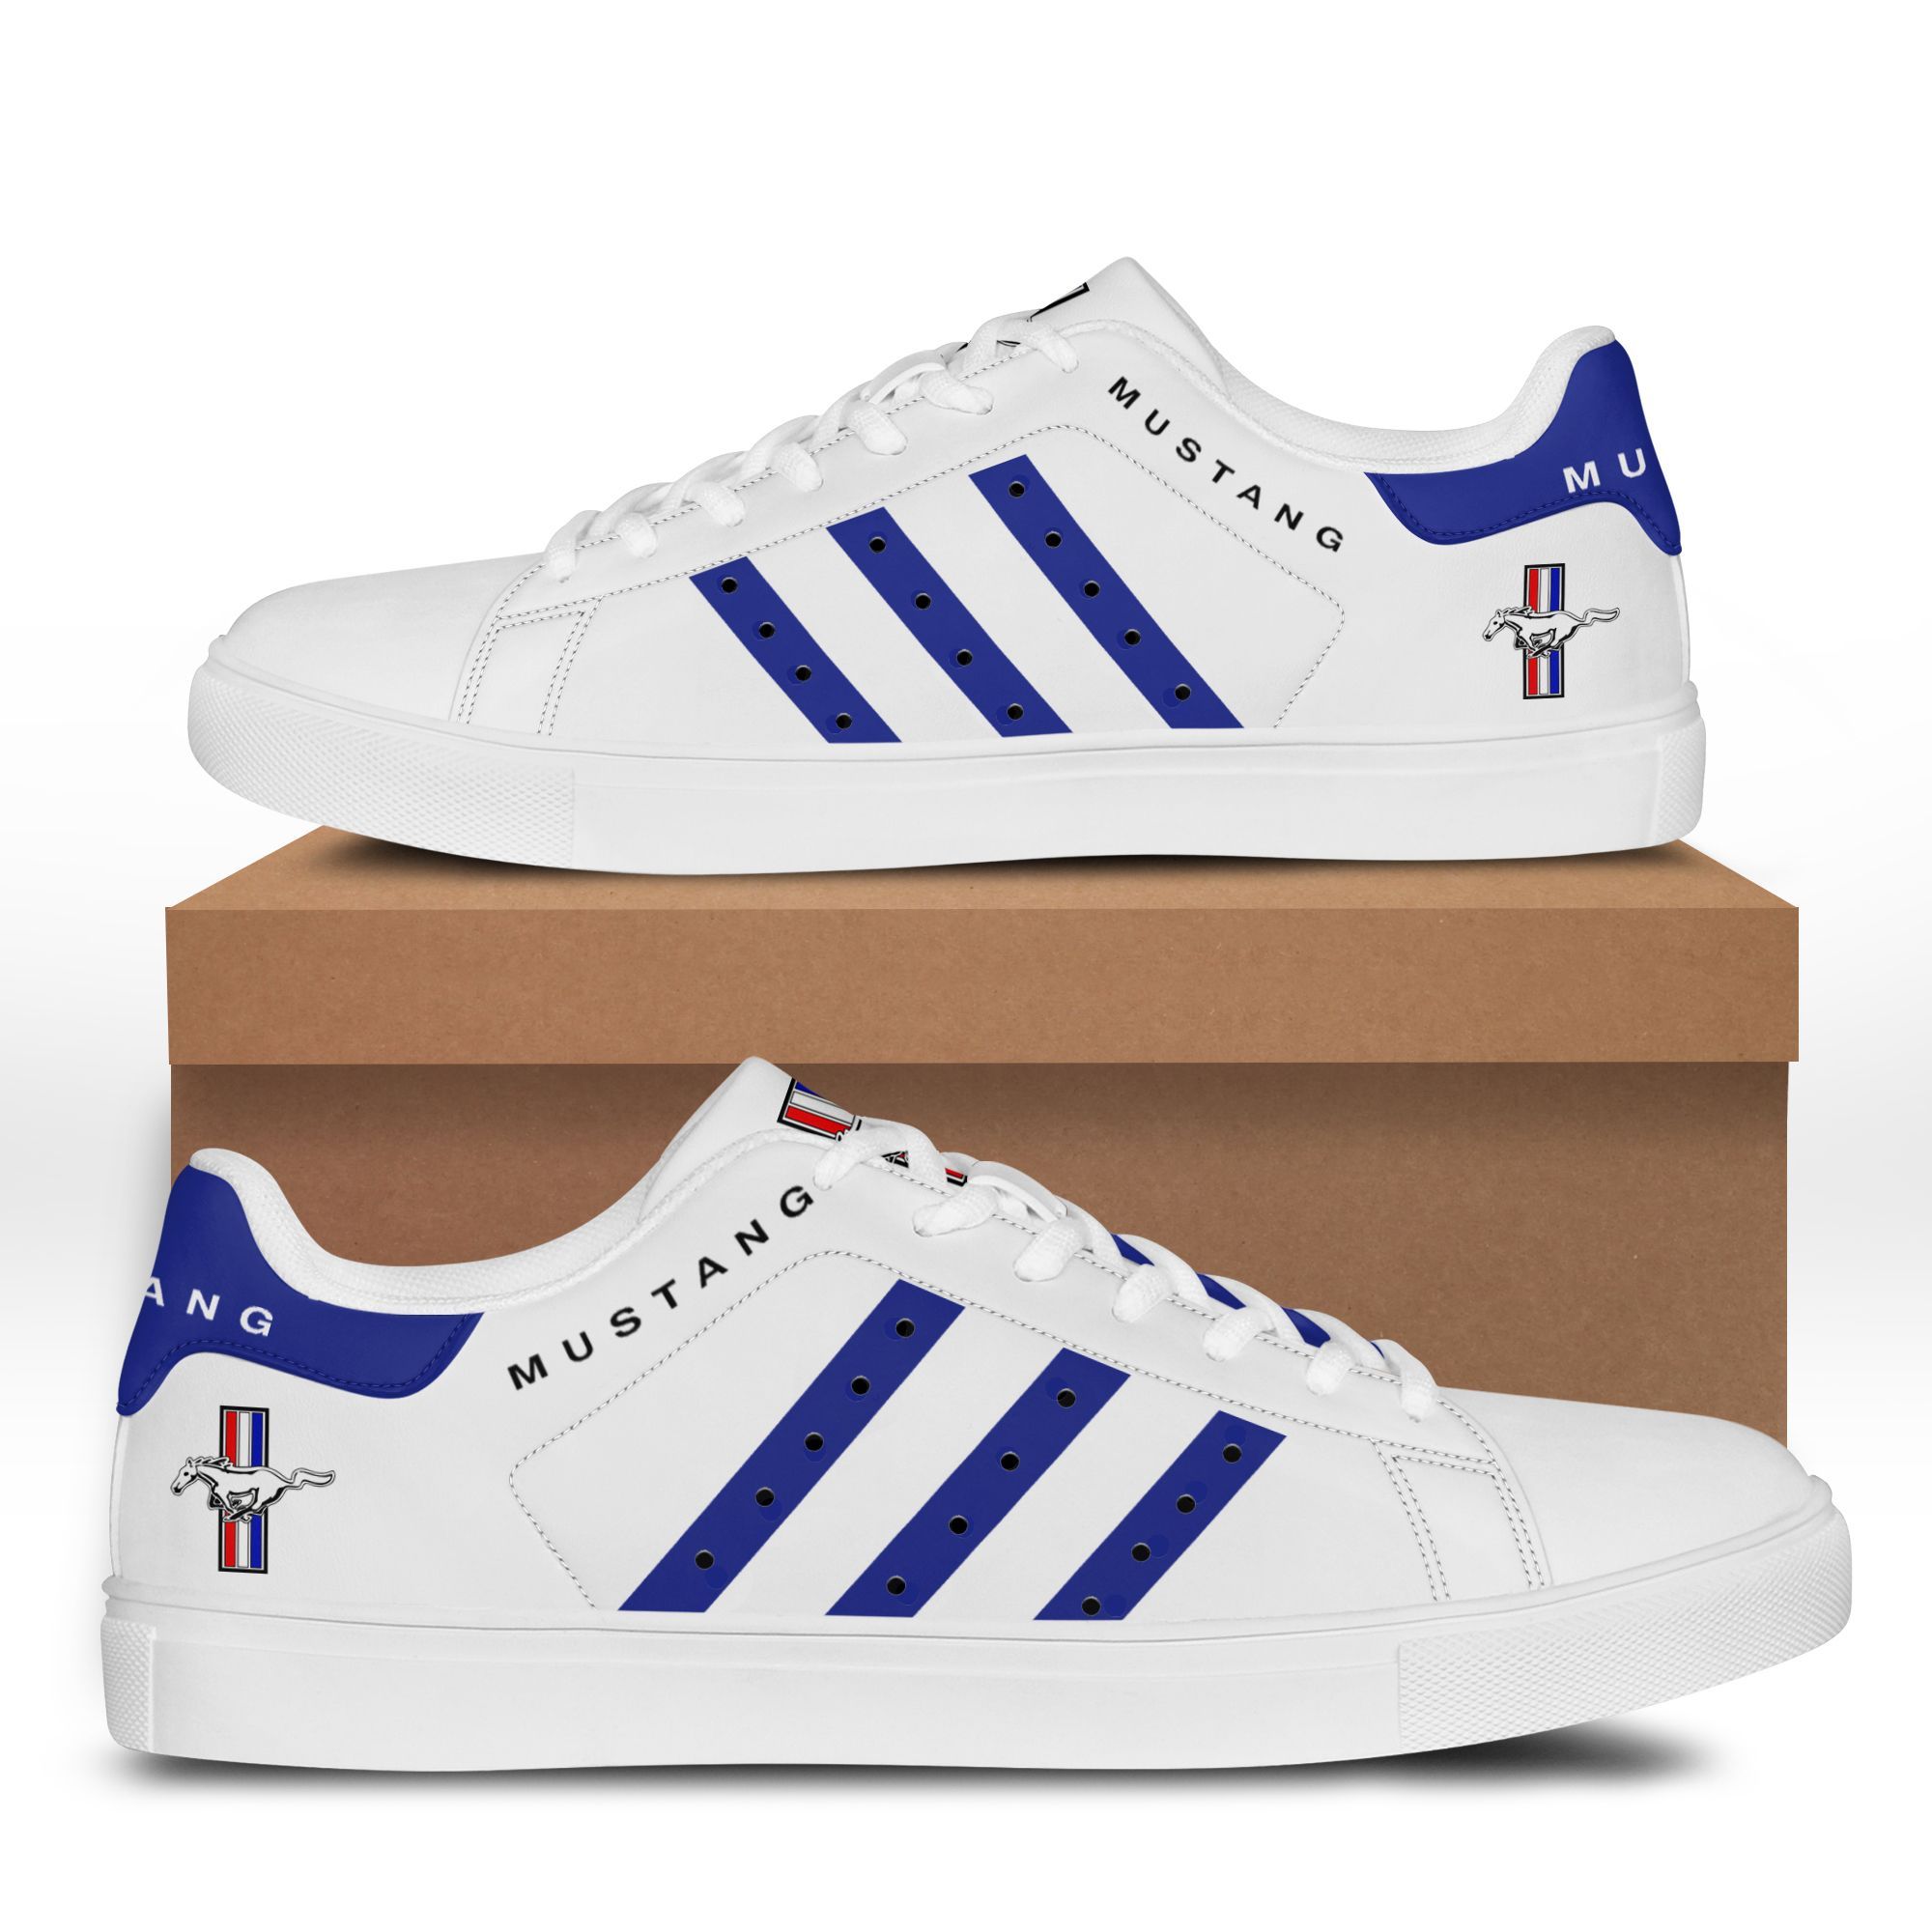 Mustang stan smith low top shoes 3